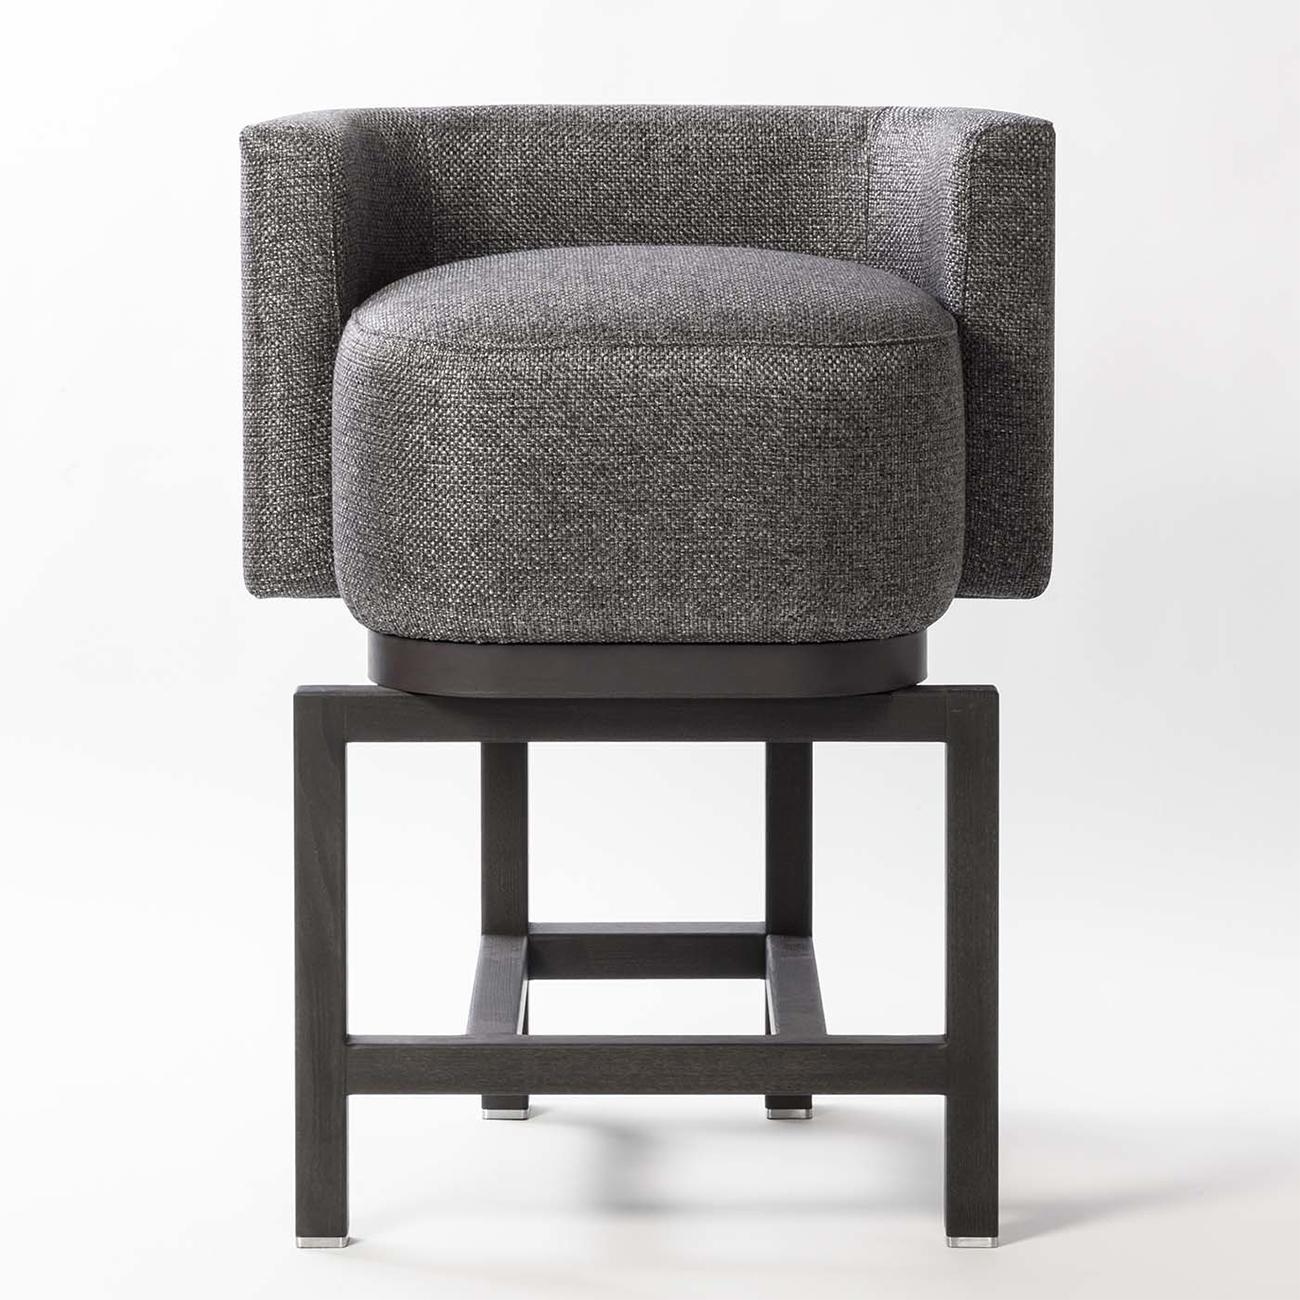 Bar stool Bergam with solid walnut base
in blackened finish. Upholstered and covered
seat with cashmere and wool fabric.